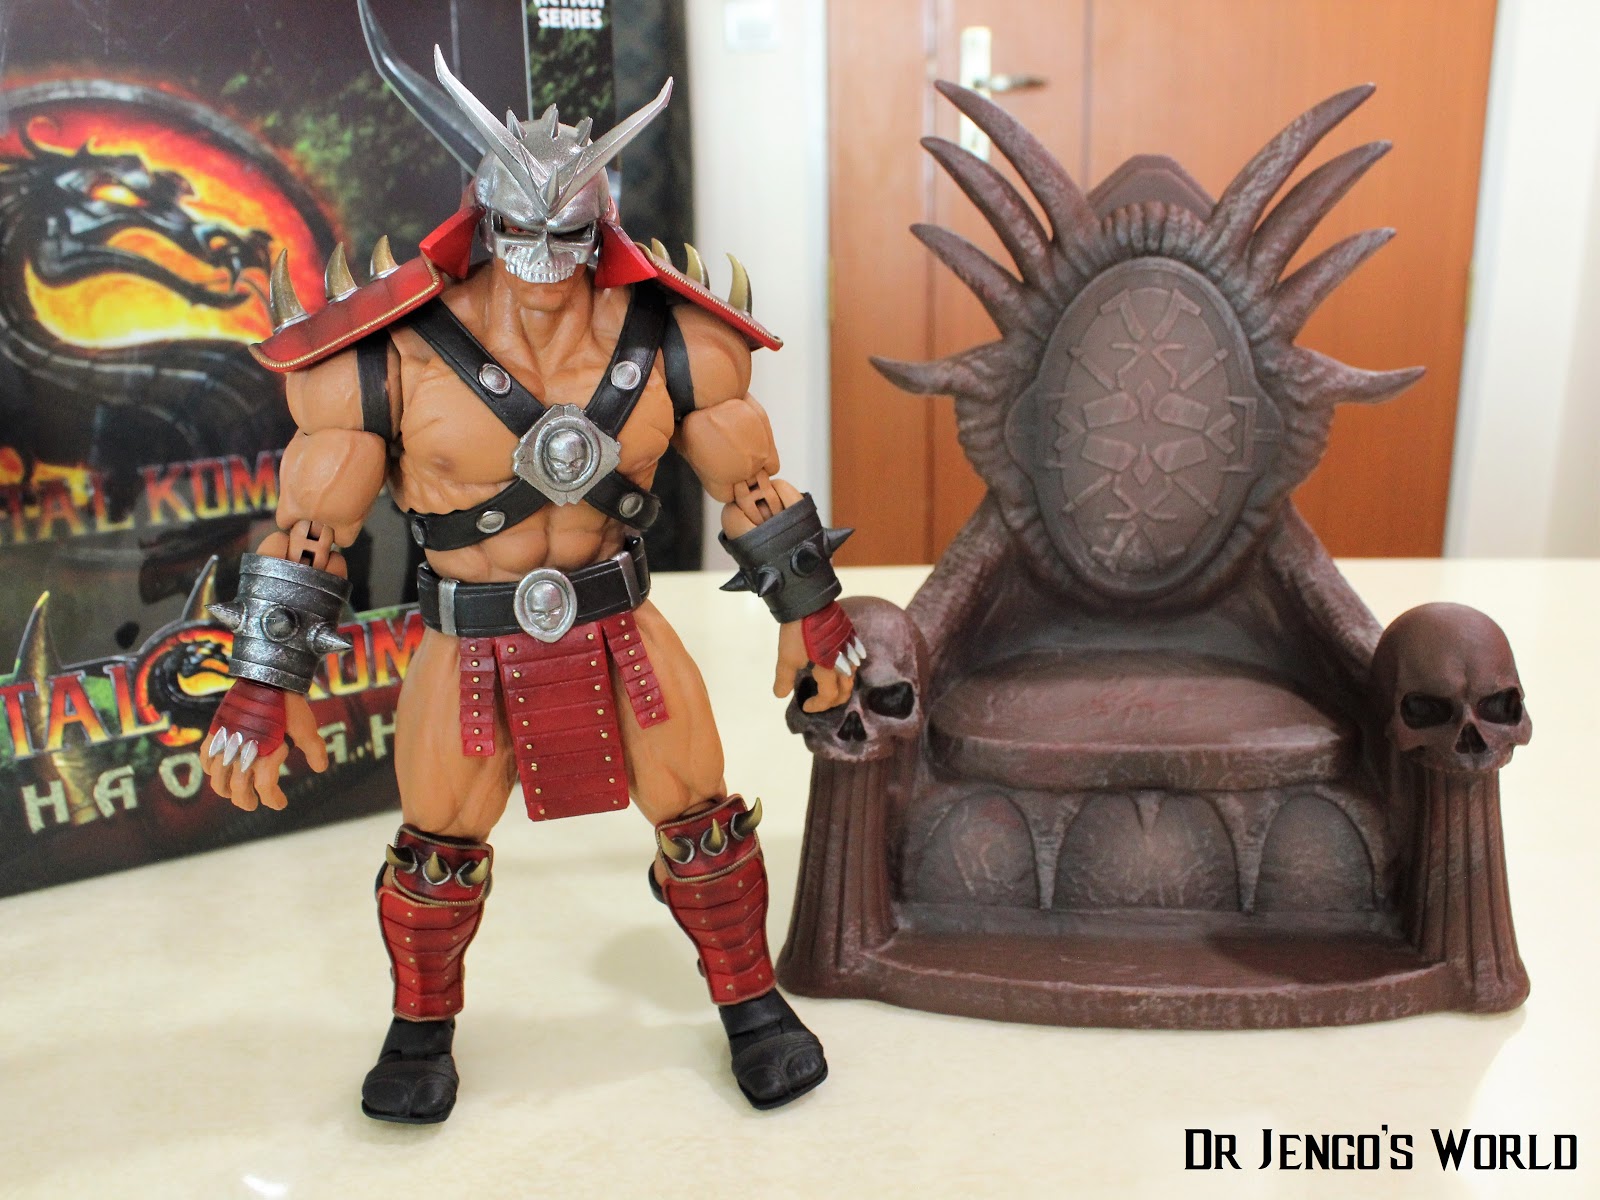 shao kahn storm collectibles